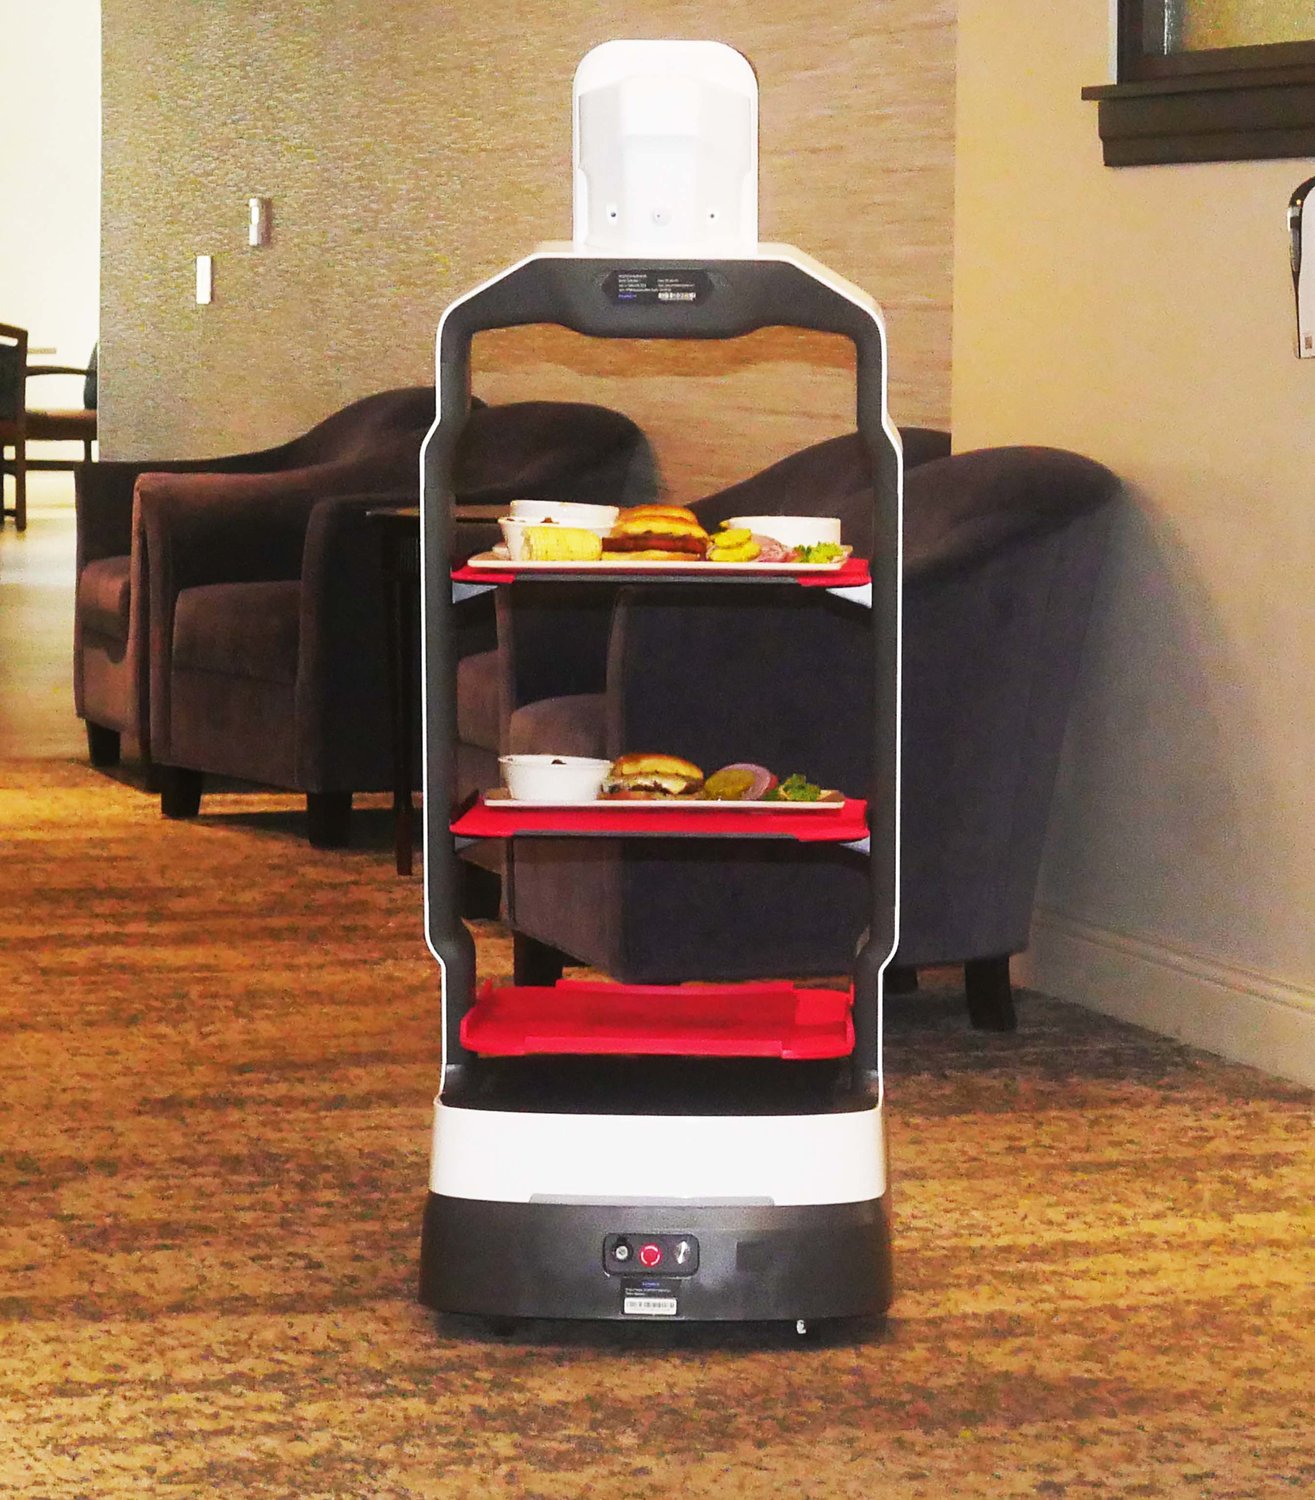 The restaurant at the Wesley Enhanced Living has two robots. Each with little TV-type heads, Robbie and Robin deliver orders to their tables.